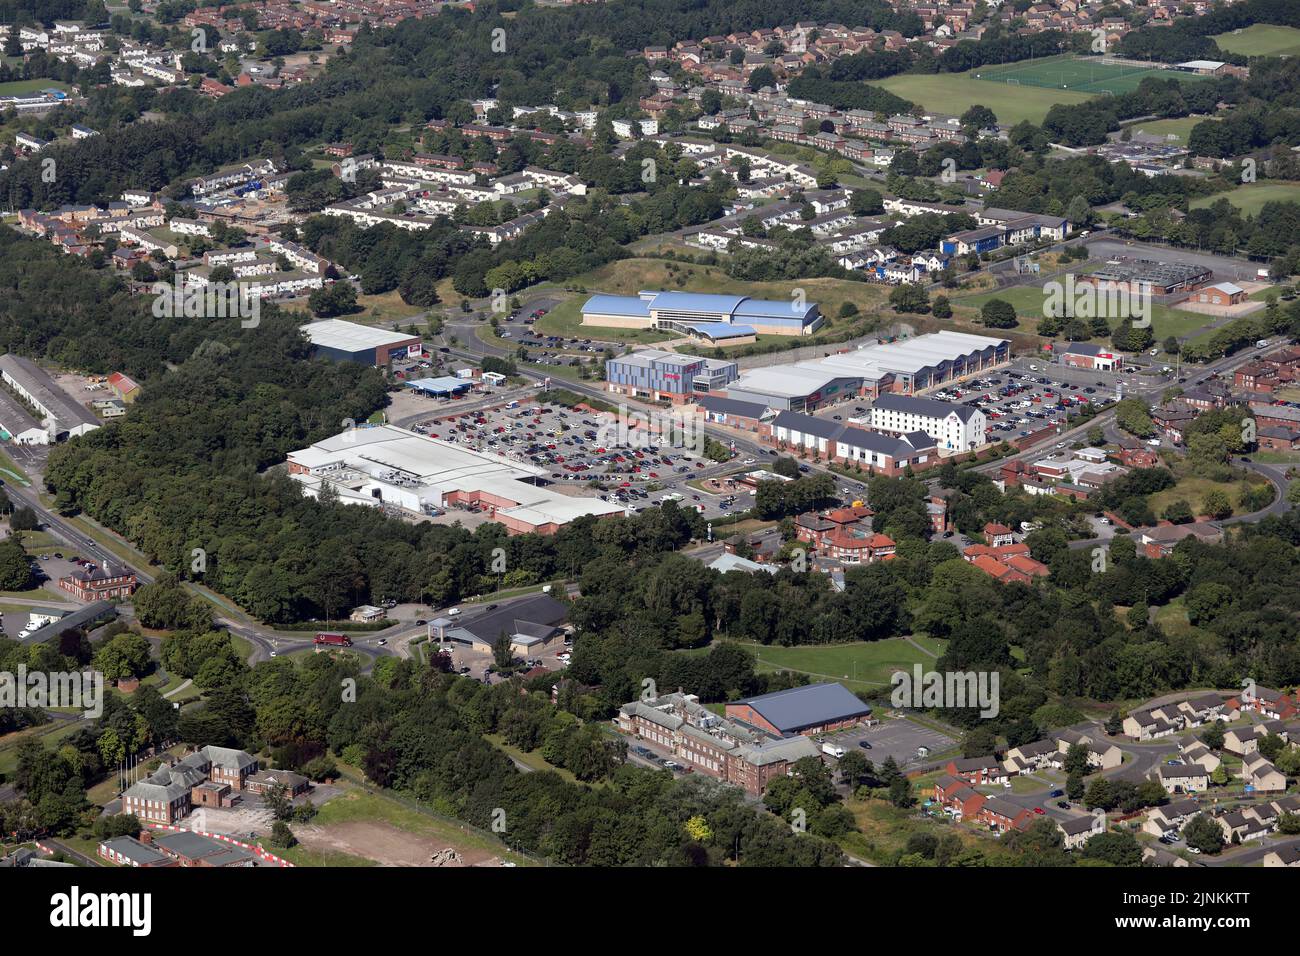 aerial view of the main shopping area at Catterick Garrison, including Tesco Superstore, Princes Gate Shopping Park & Catterick Leisure Centre Stock Photo